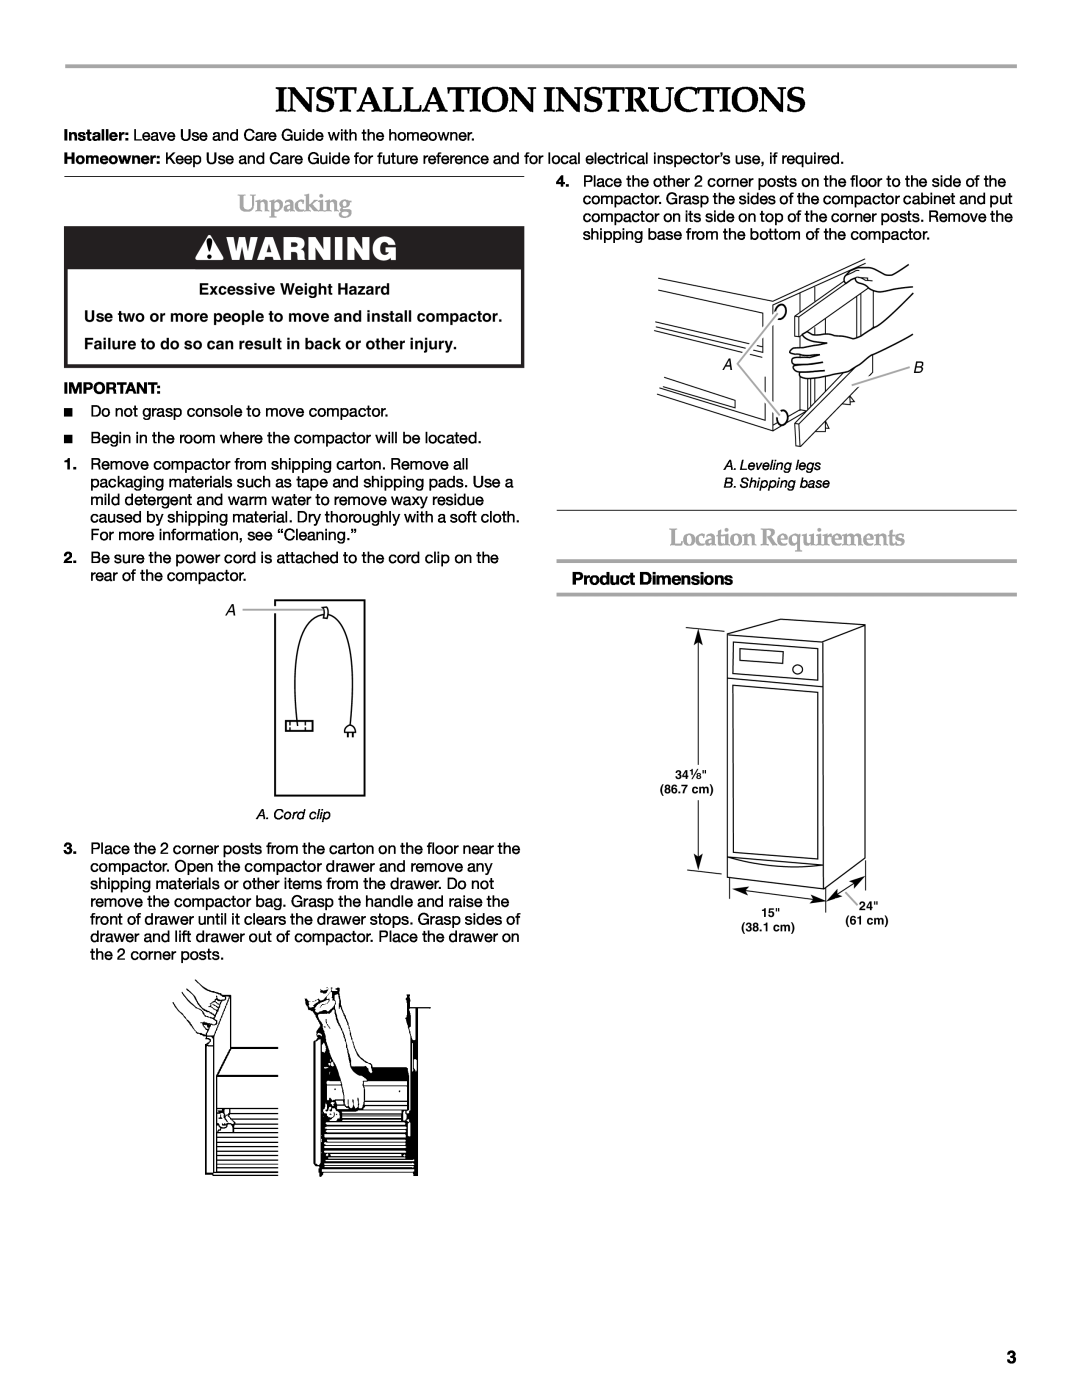 KitchenAid KUCS03FTSS, W10242569A manual Installation Instructions, Unpacking, Location Requirements, Product Dimensions 